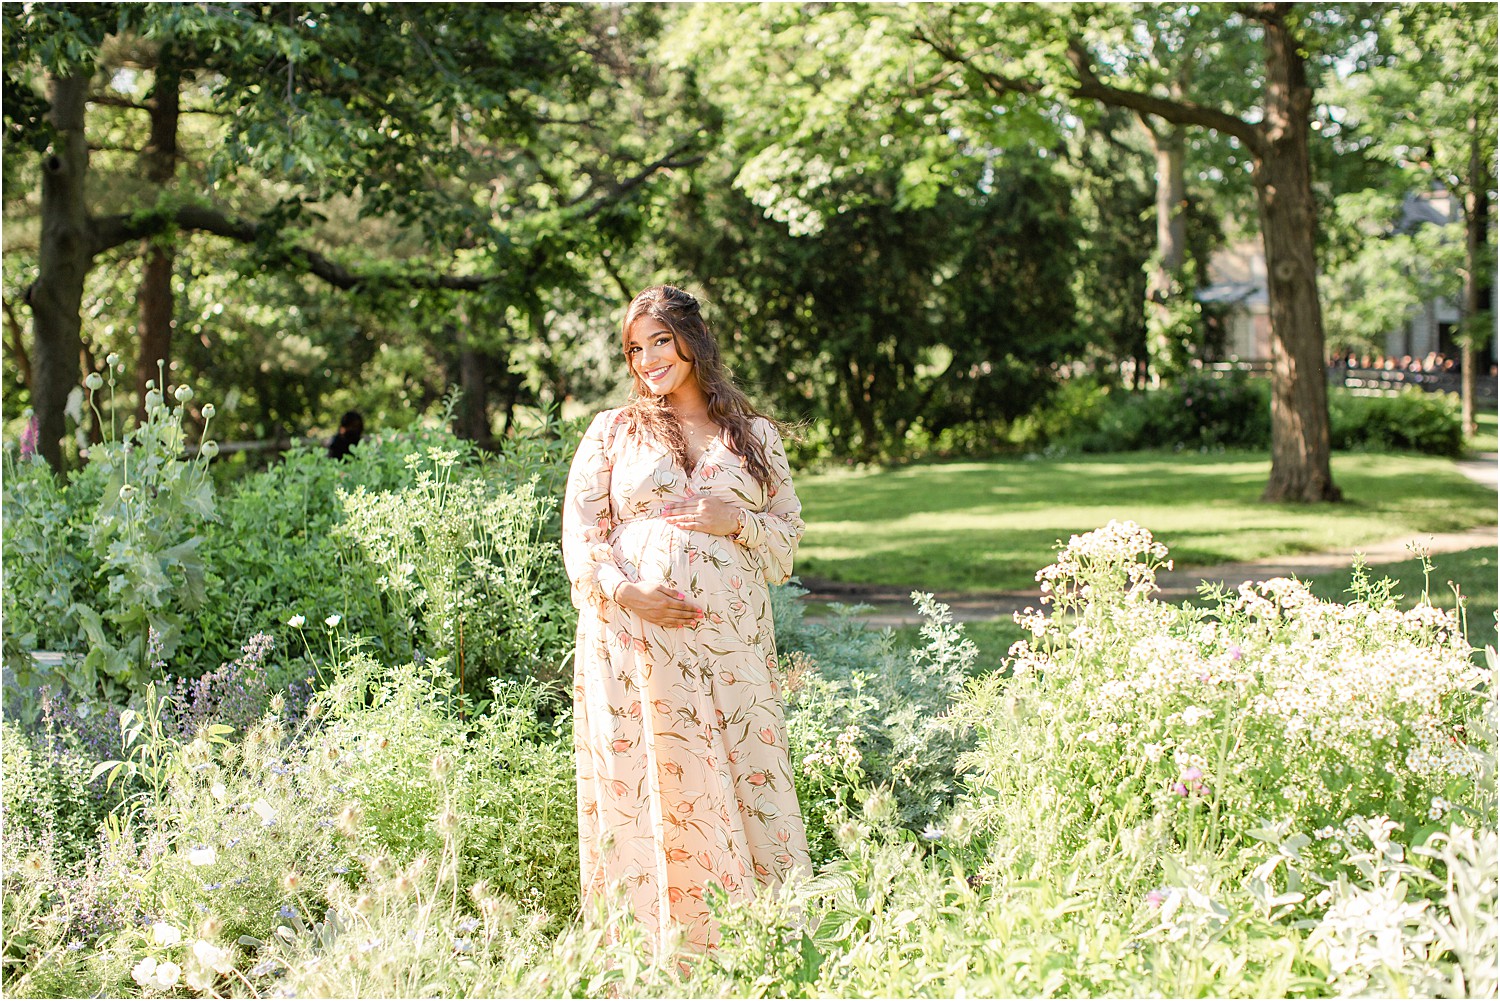 Mom holds baby bump in field of green grass in PA